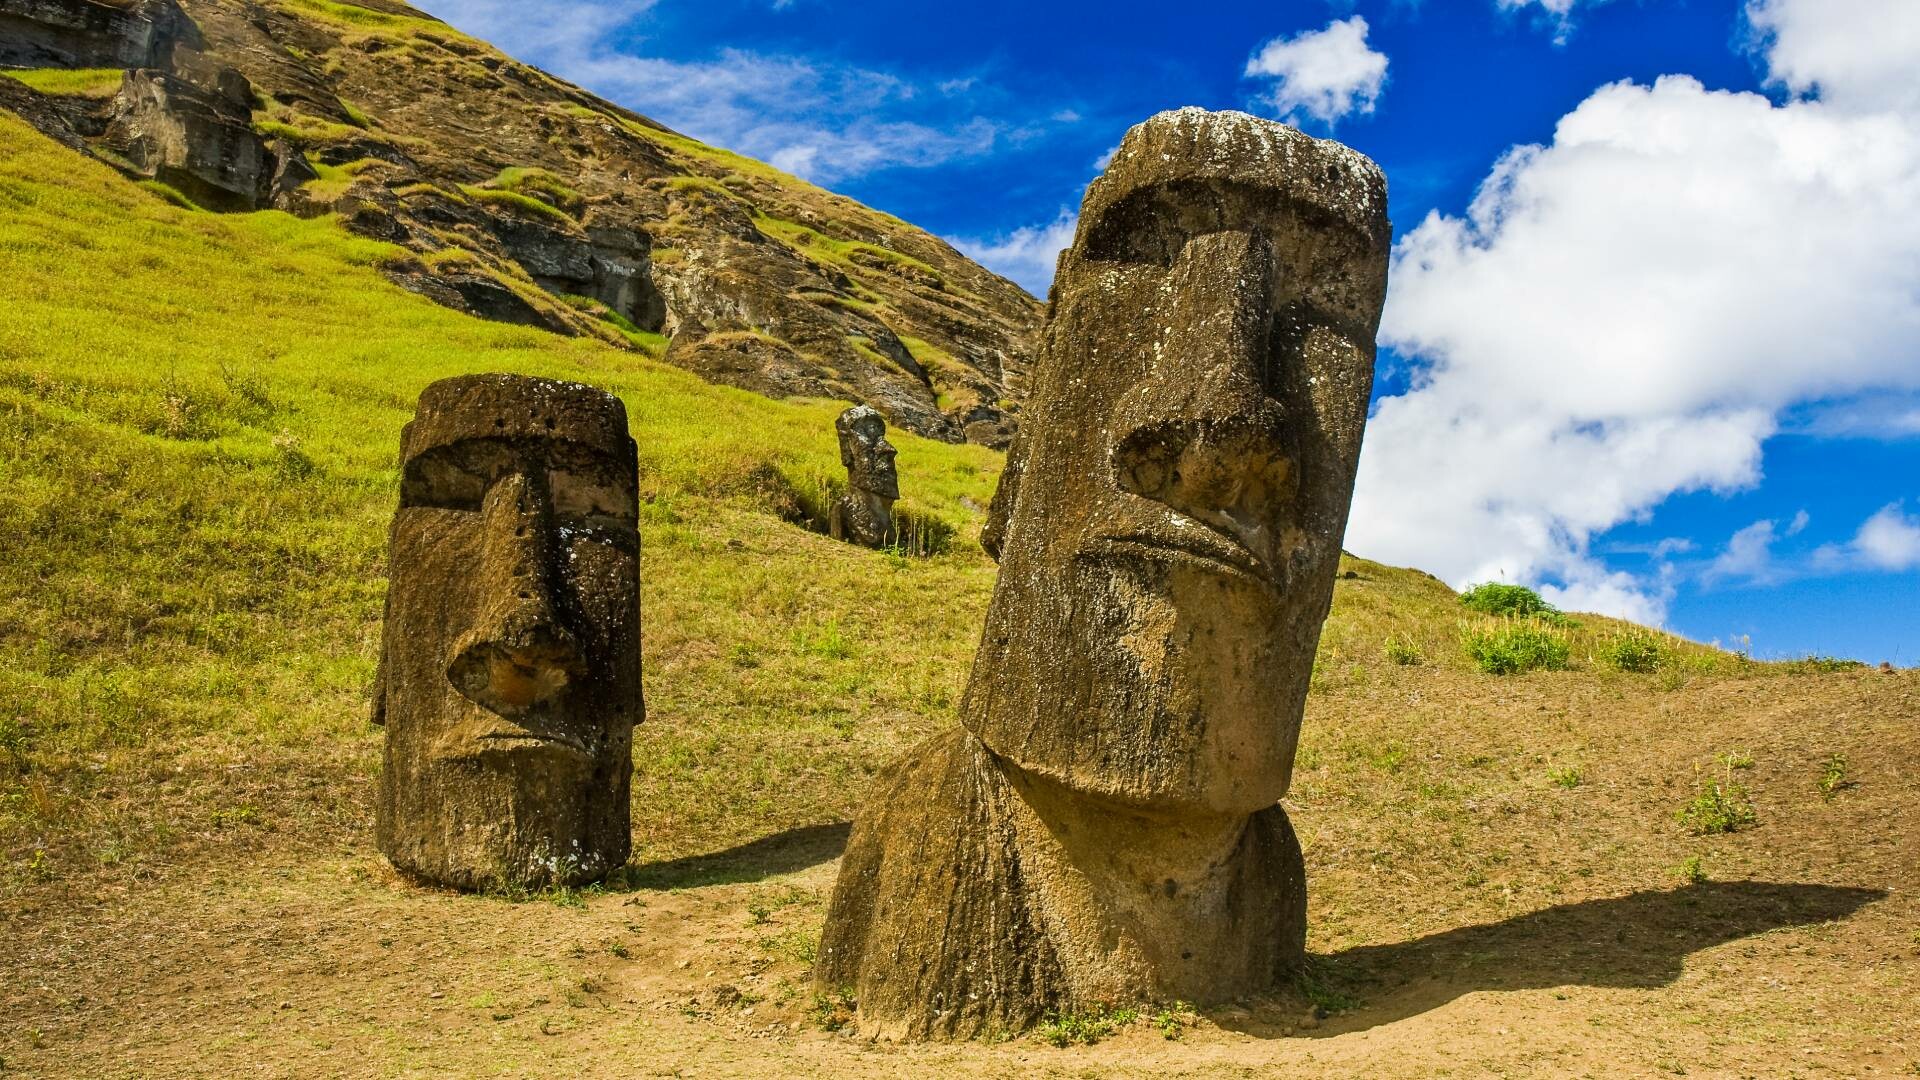 Moai: The Rapa Nui Statues commonly referred to as the "Easter Island Heads". 1920x1080 Full HD Wallpaper.